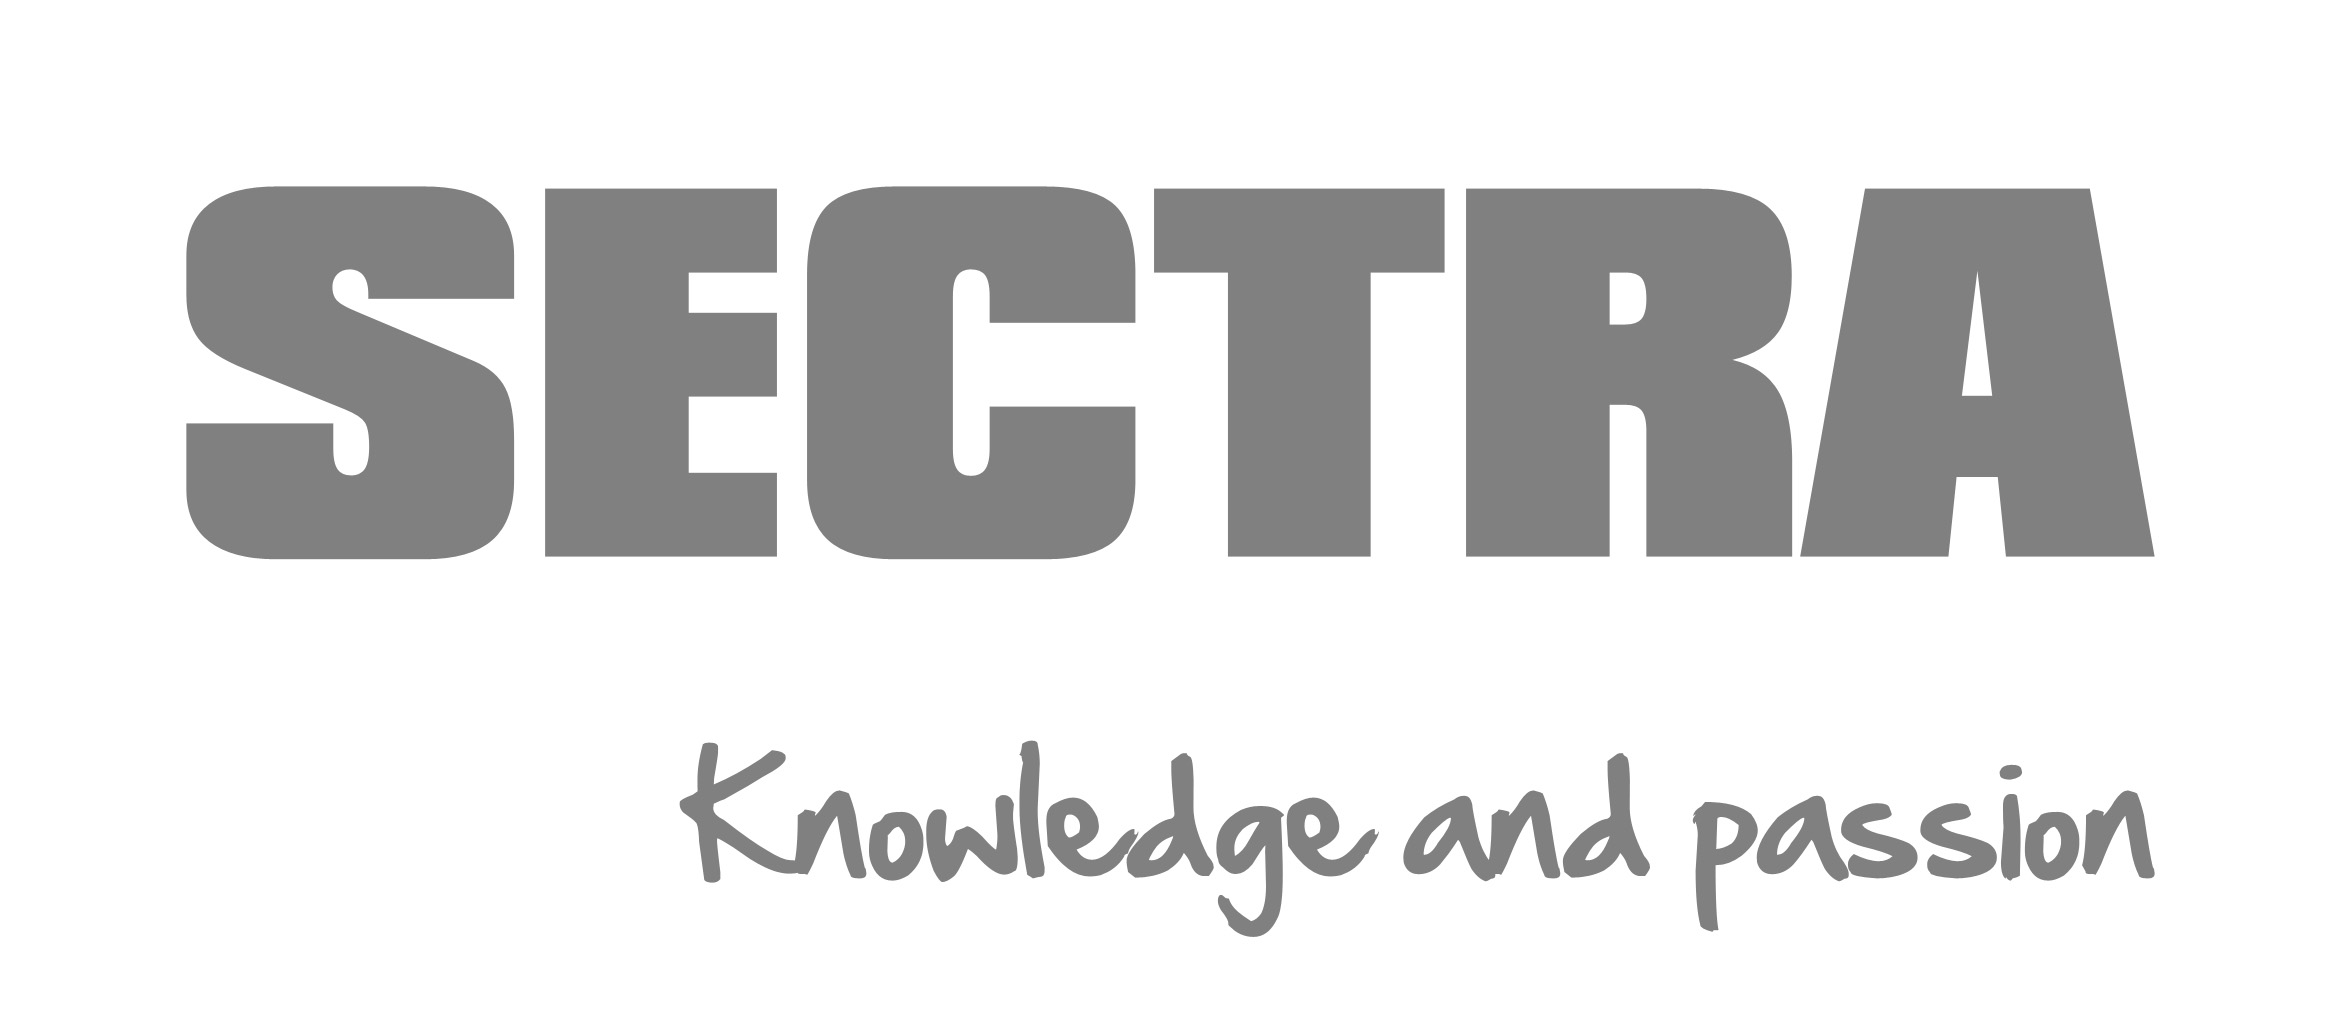 Sectra-logo-Knowledge-and-passion-vector@file116.jpg